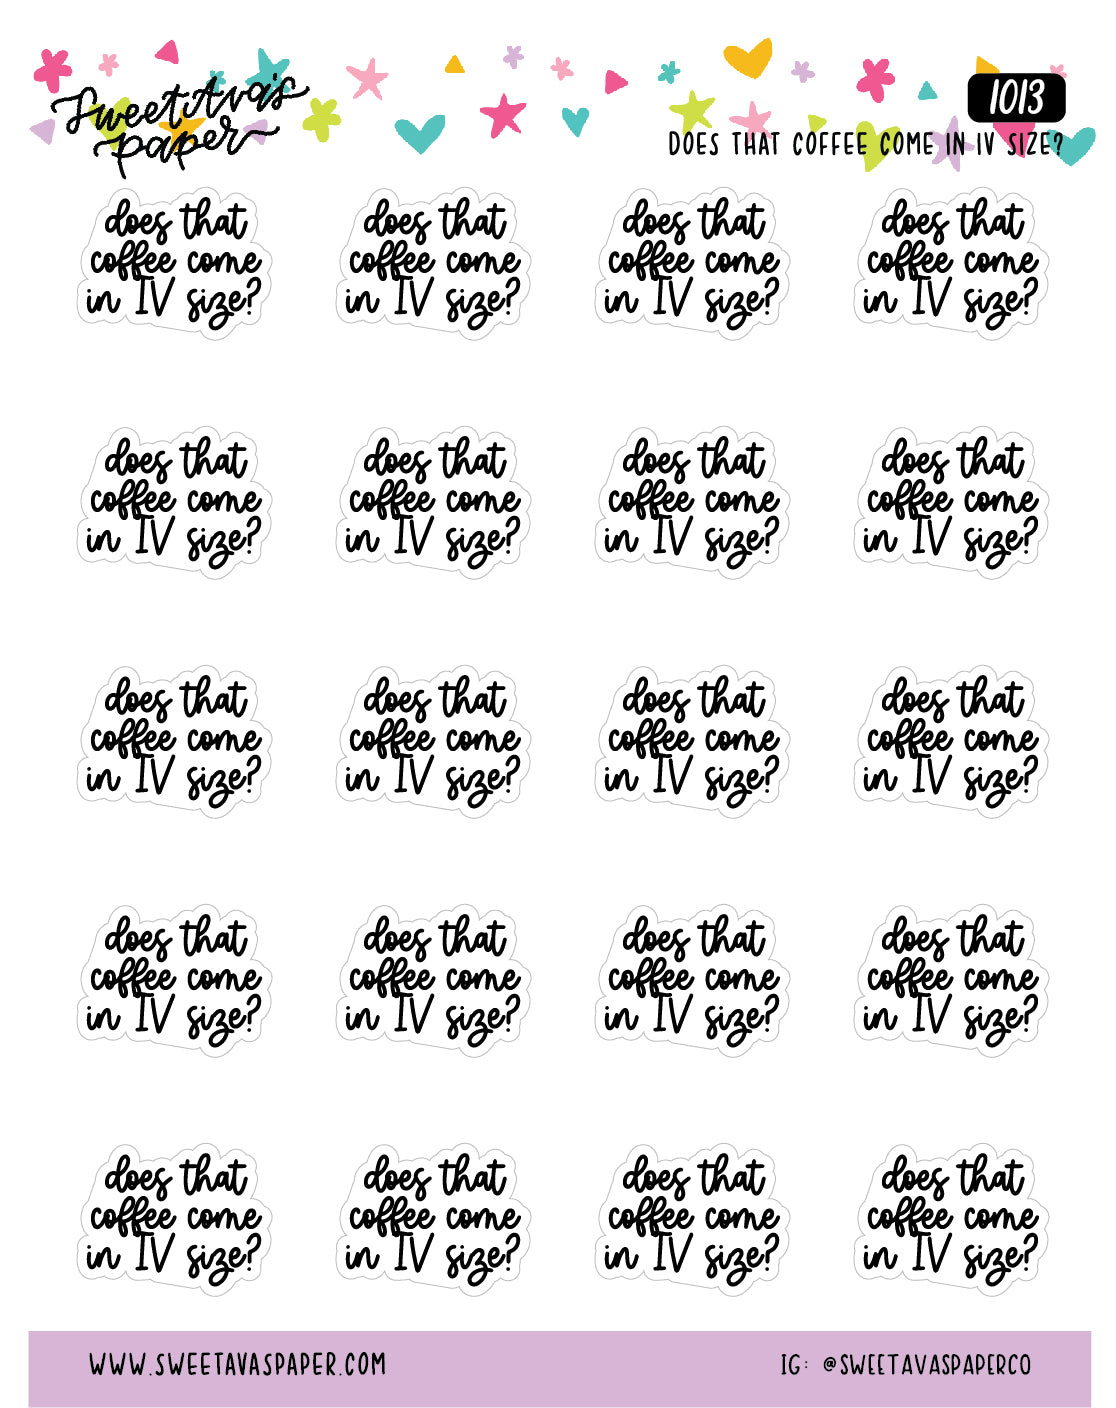 Does That Coffee Come In IV Size Planner Stickers - Script / Text - [1013]